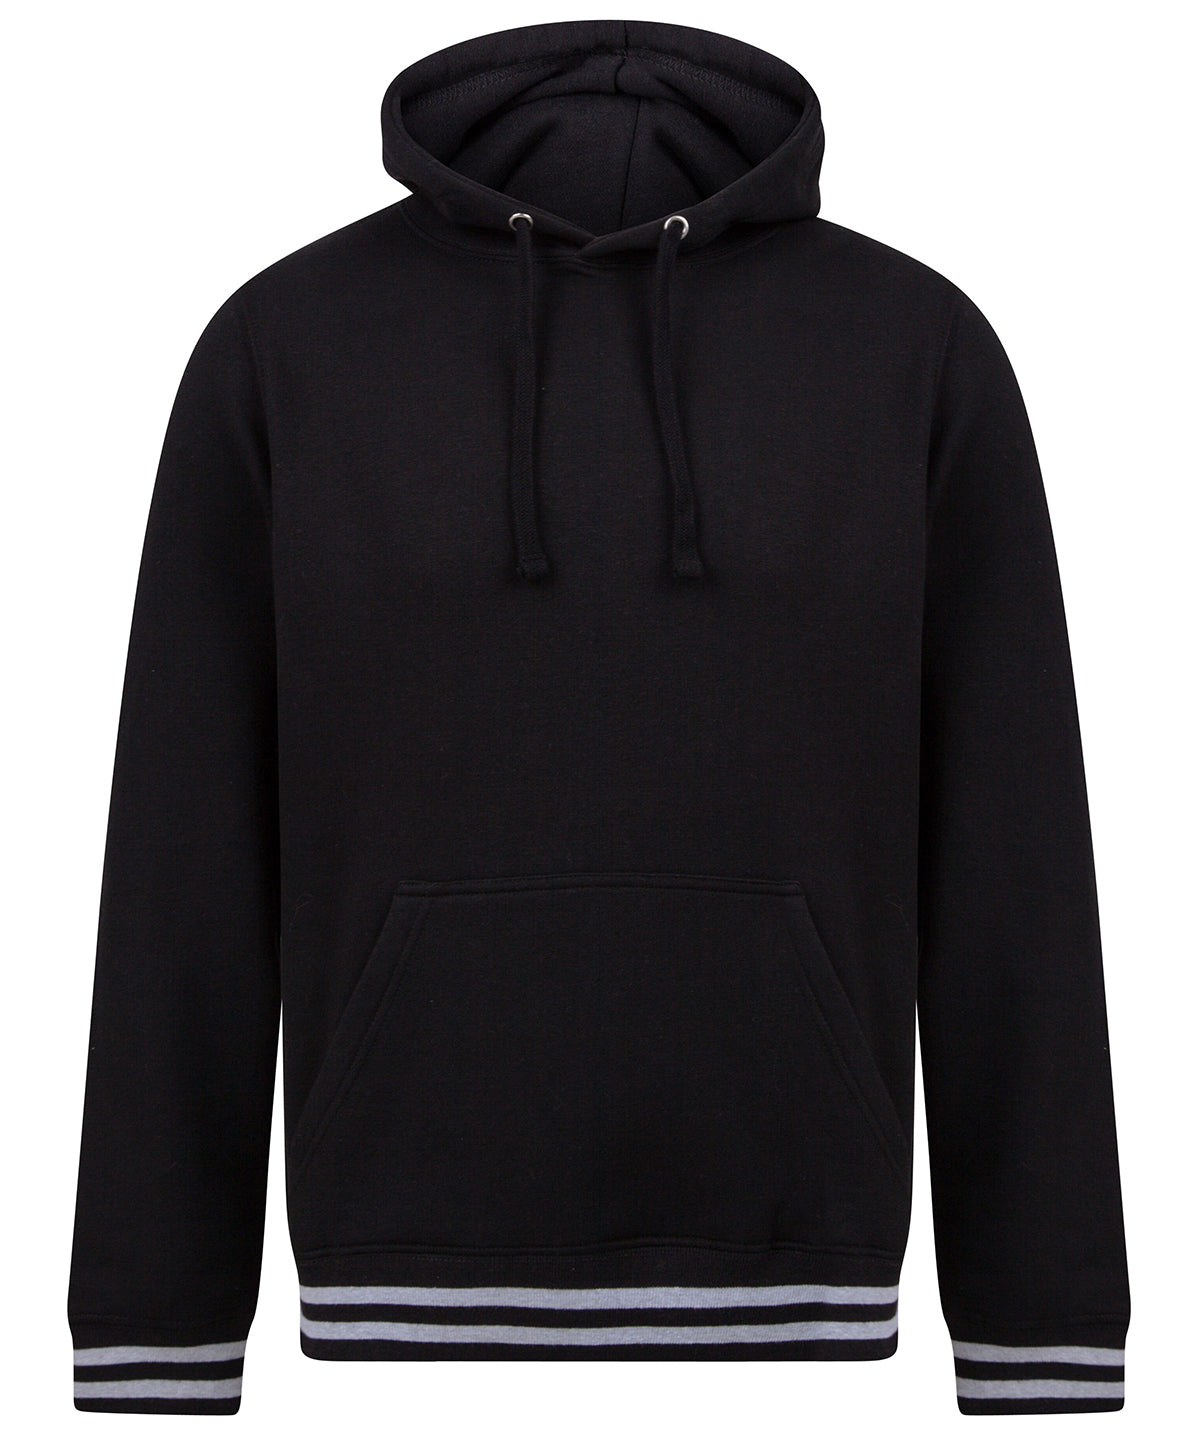 Personalised Hoodies - Black Front Row Hoodie with striped cuffs